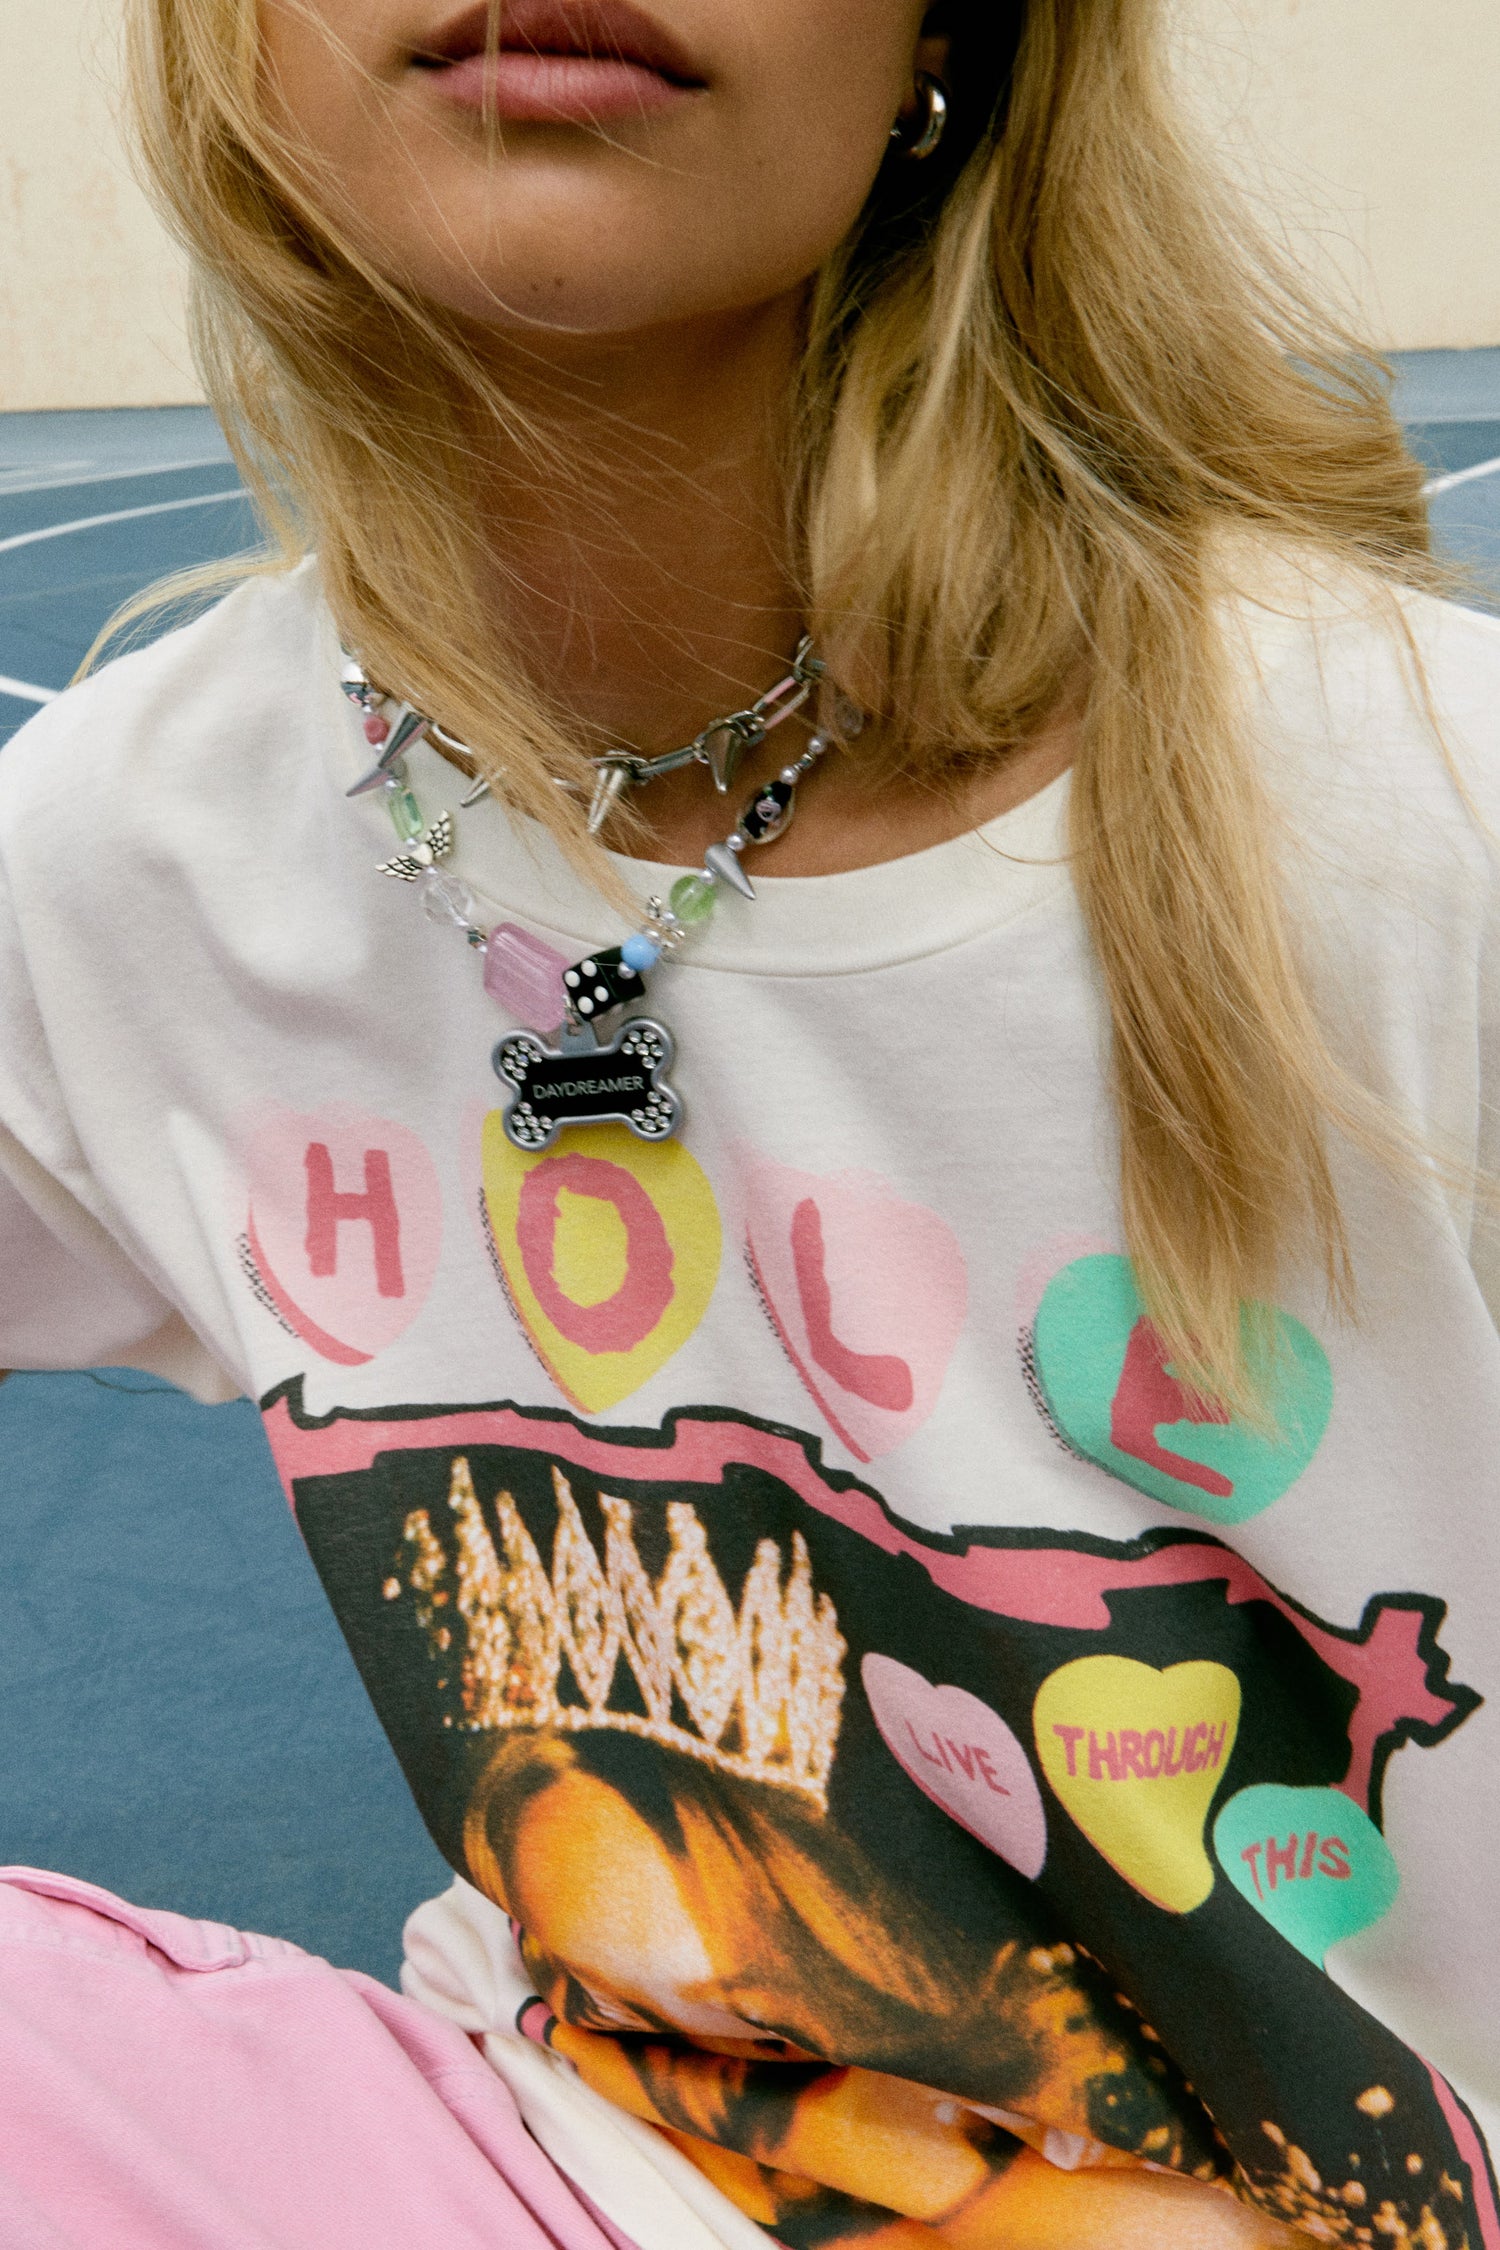 Blonde hair model in 90s Hole merch tee with grungy, poster style designed with the original artwork from Hole’s second studio album “Live Through This.” The tour details stamped along the back.